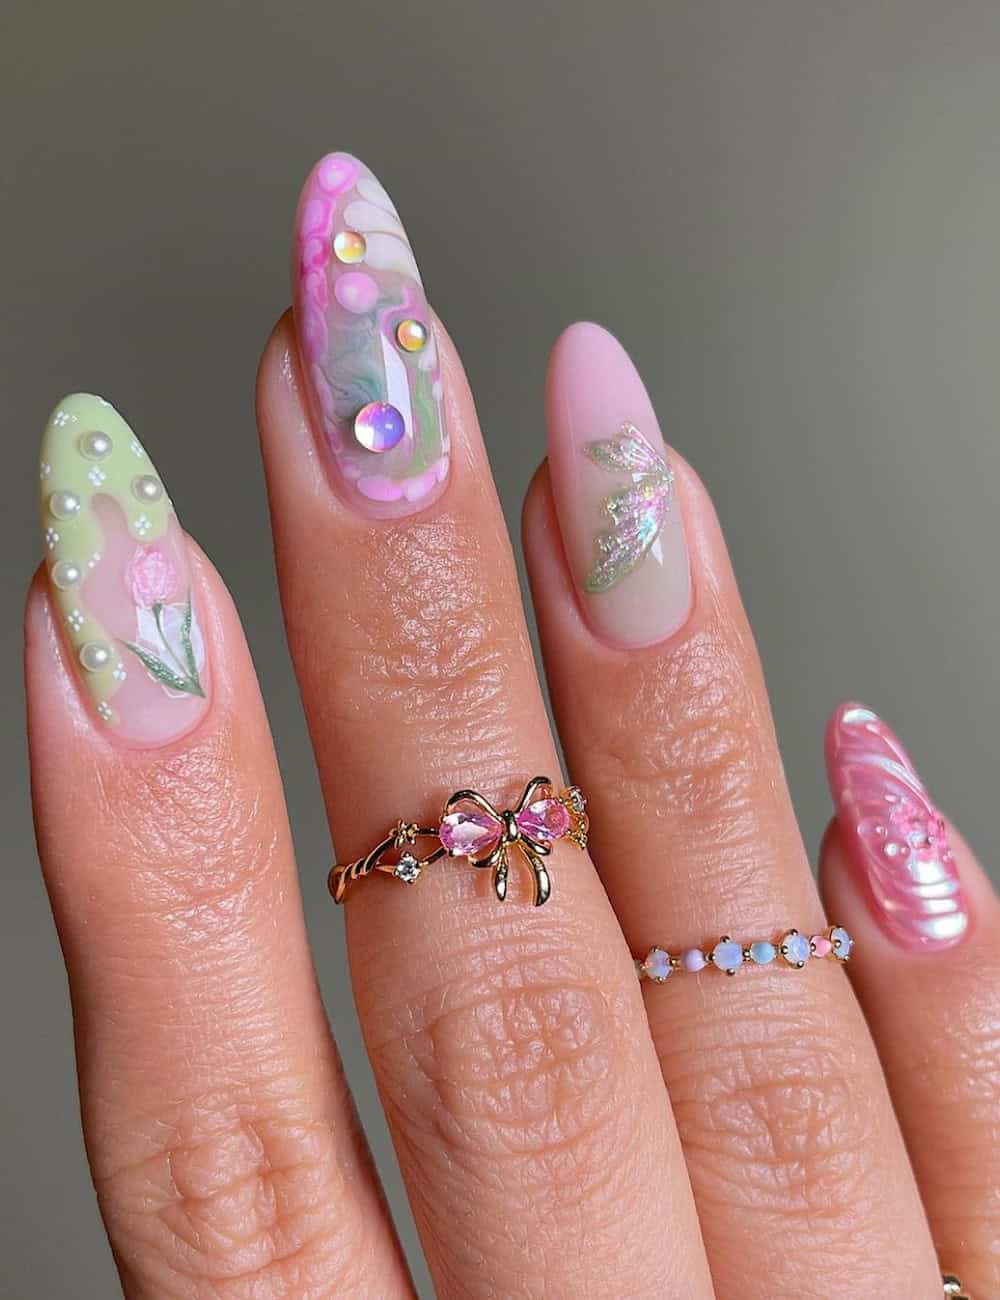 long almond nails with pink, purple, and green polish featuring 3D fairy nail art